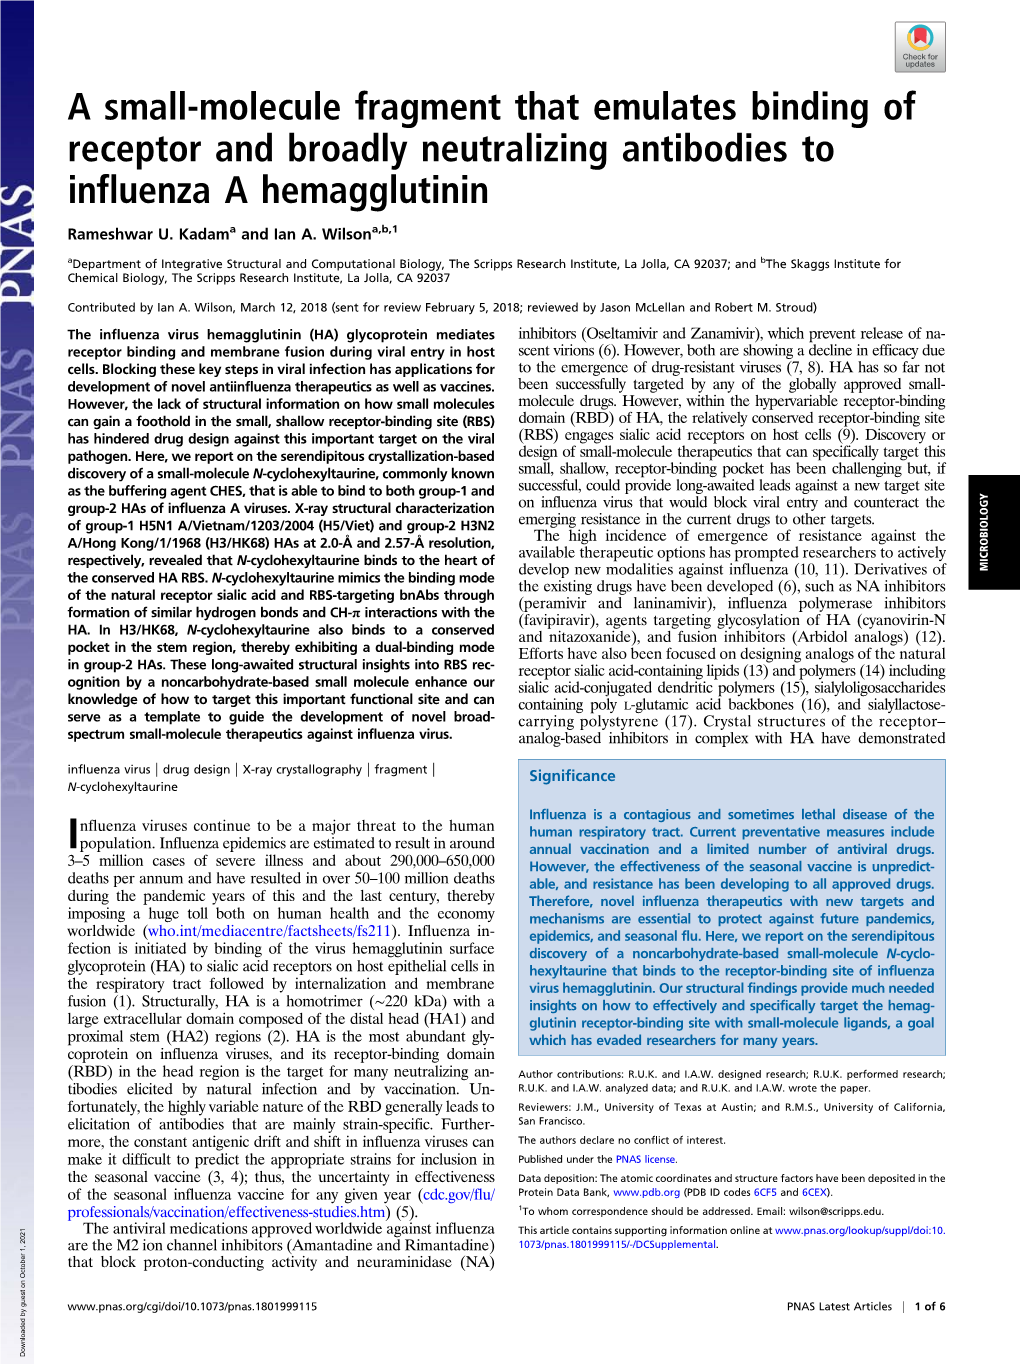 A Small-Molecule Fragment That Emulates Binding of Receptor and Broadly Neutralizing Antibodies to Influenza a Hemagglutinin